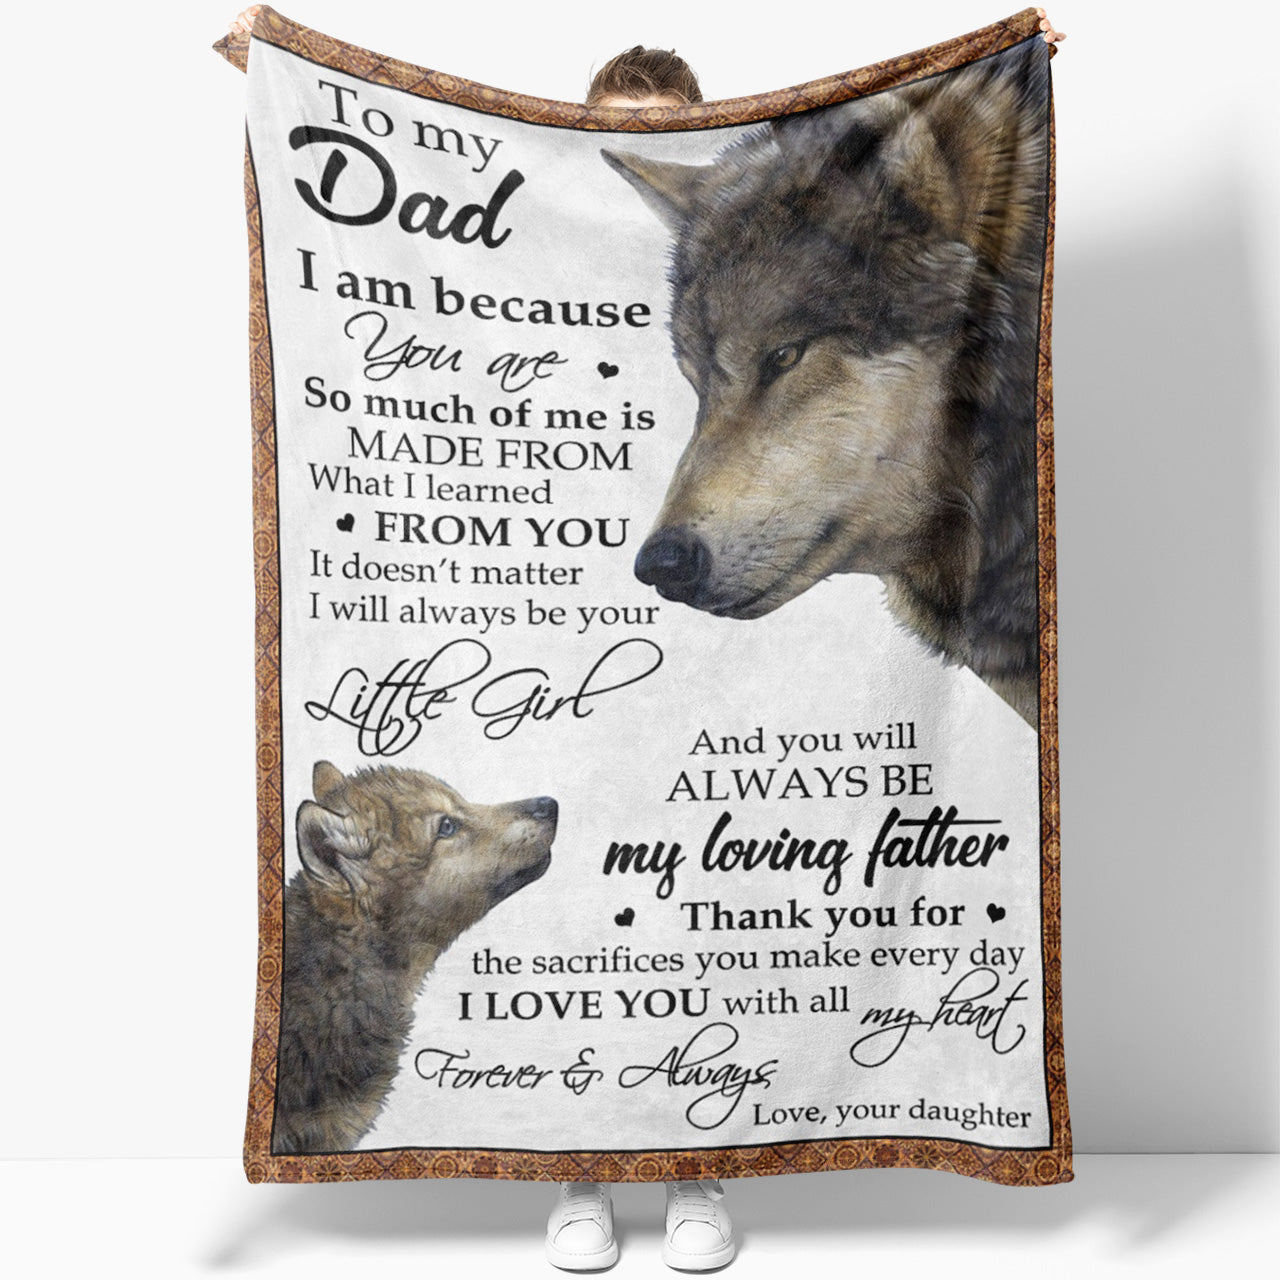 Gifts for Dad Blanket - to My Dad Gift - Birthday Gifts for Dad